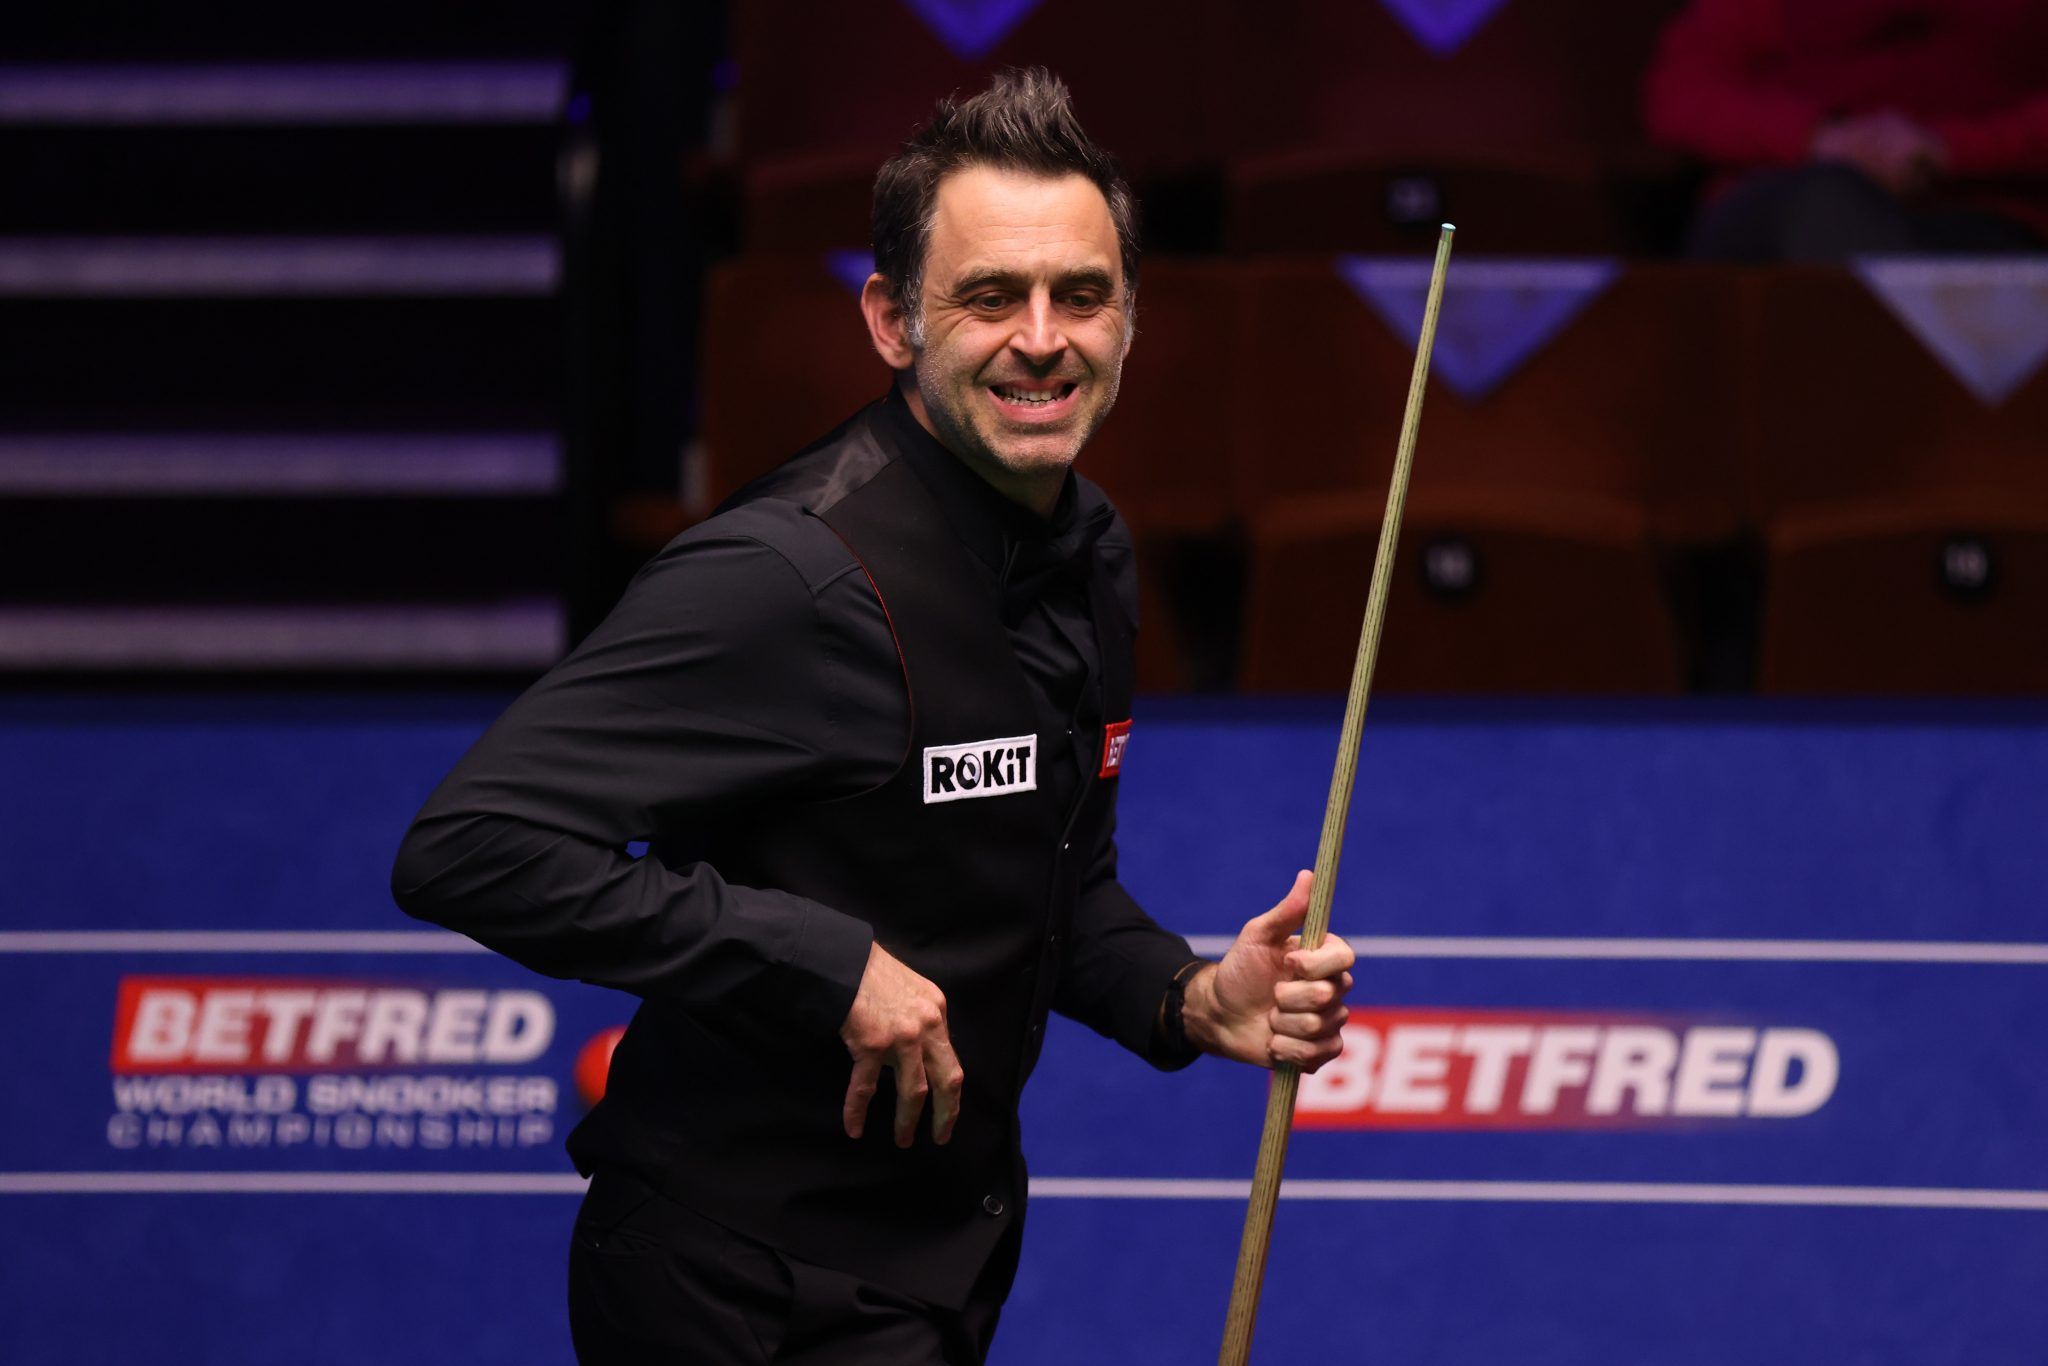 Ronnie OSullivan slammed for x-rated gesture on live TV